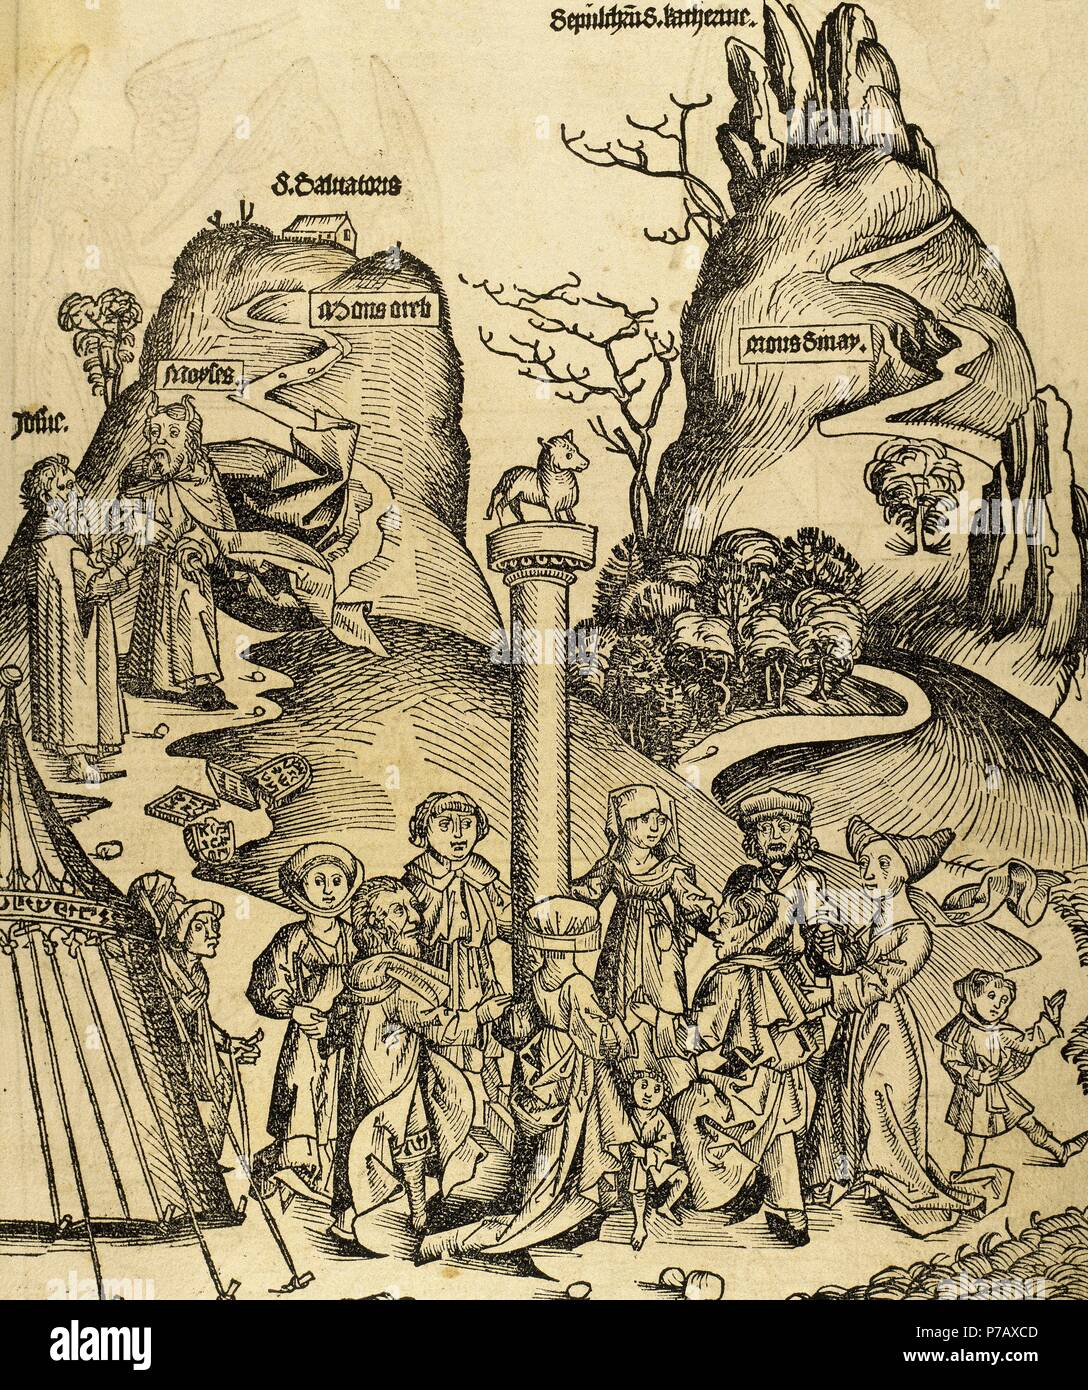 Moses and Joshua descend from Mount Sinai with the tablets of the Law broken and found the Israelites worshiping the golden fleece. Engraving in Liber Chronicarum by Hartman Schedel, 15th century. Latin edition. Stock Photo